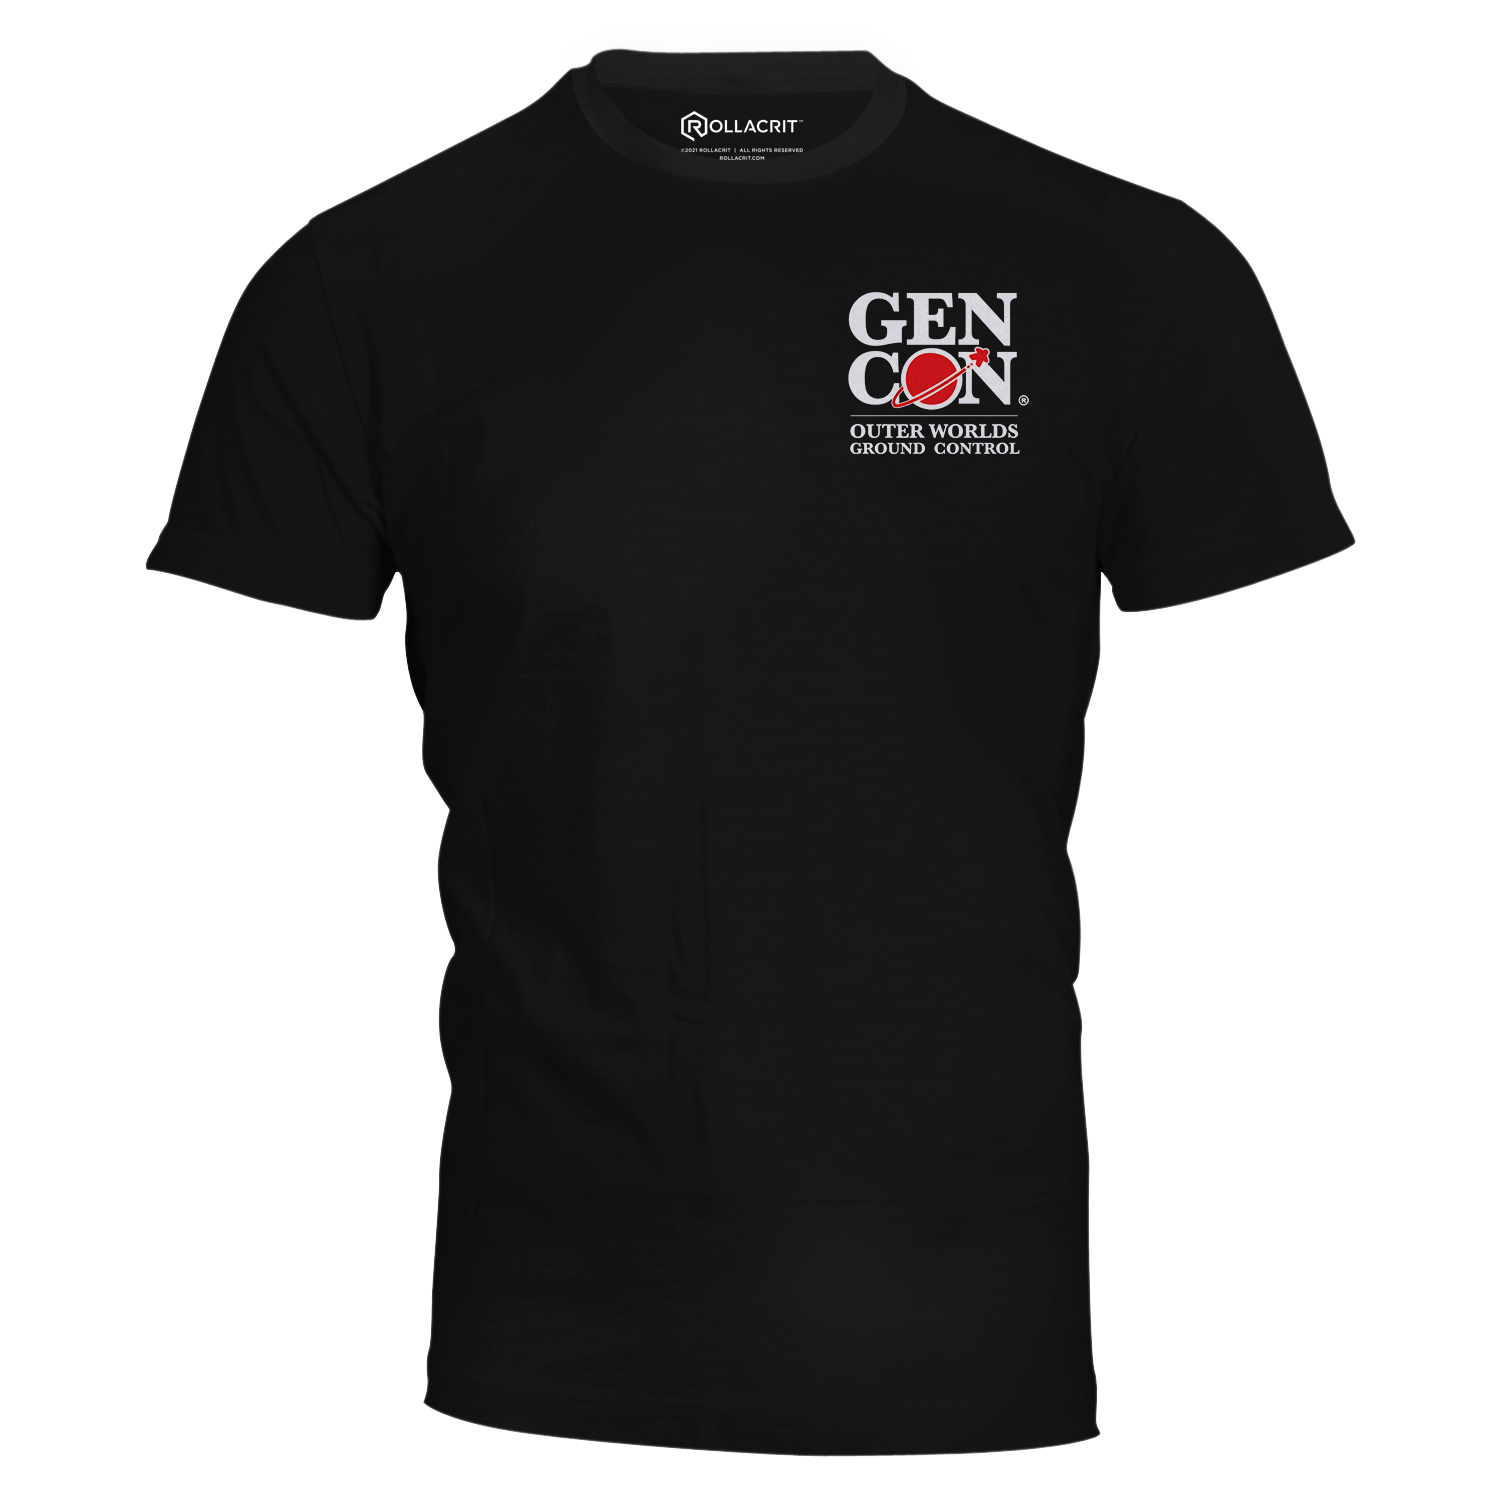 Gen Con Outer Worlds Ground Control T-Shirt | Rollacrit